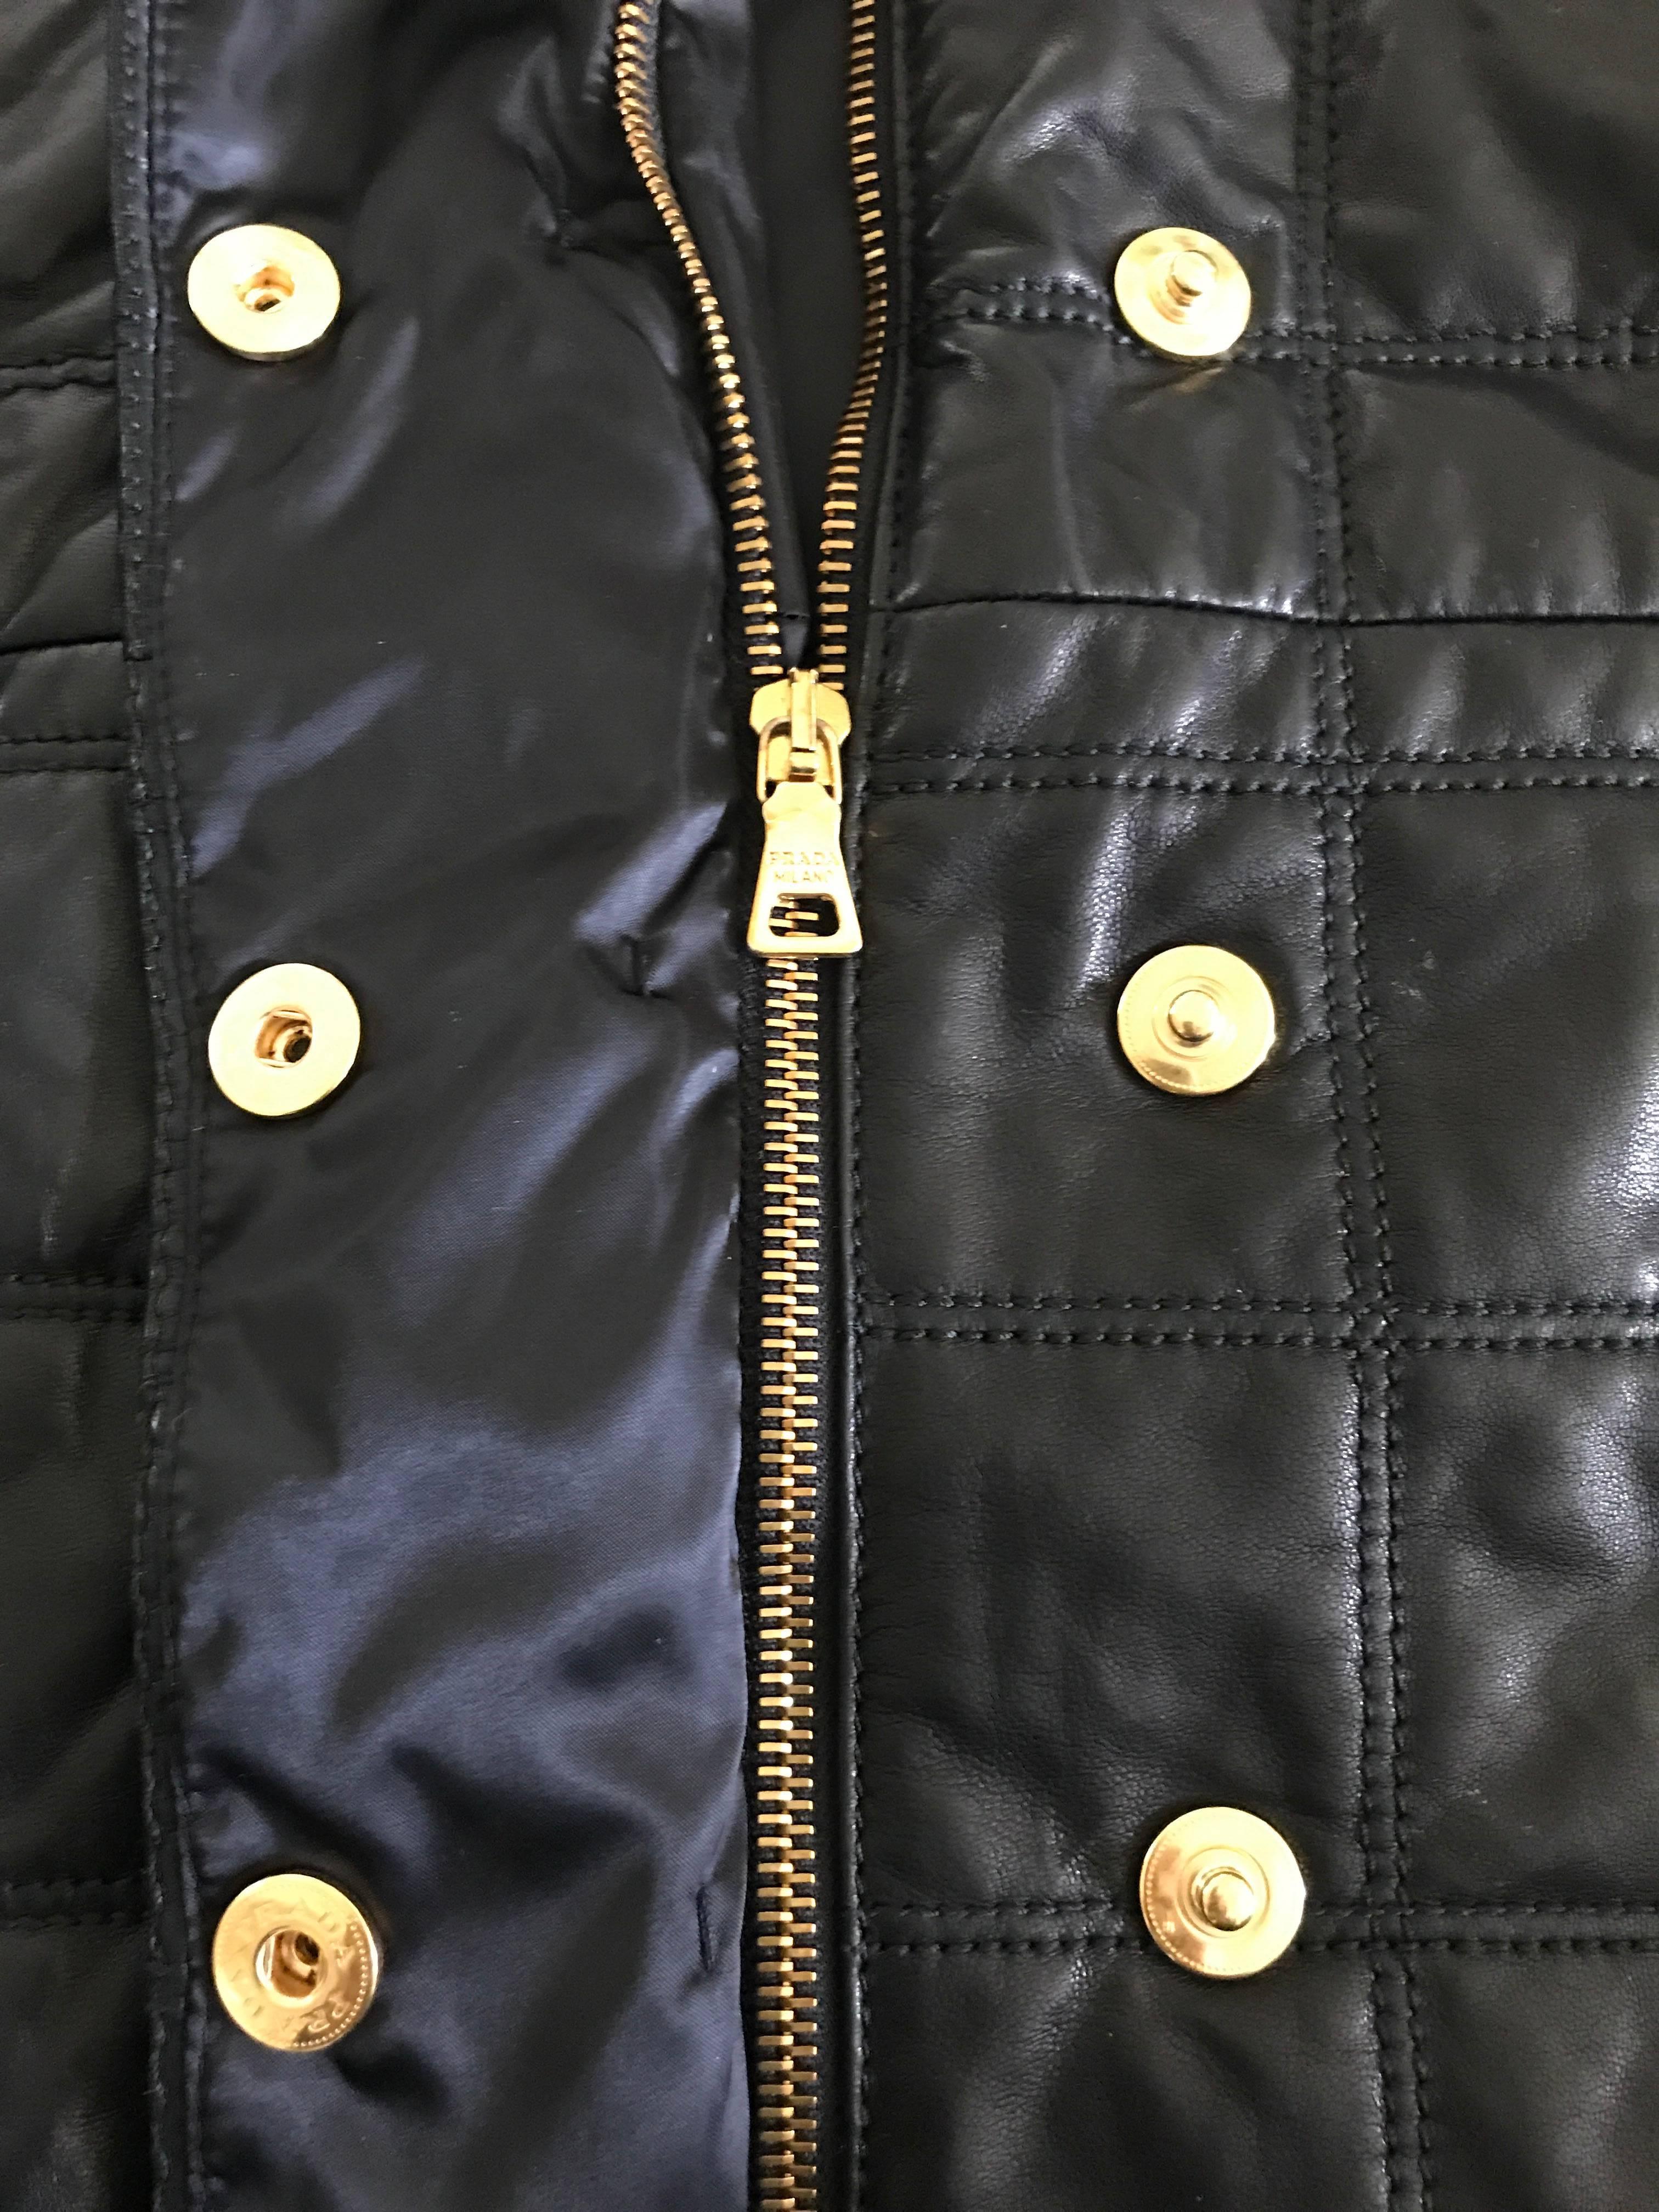 Prada Black With Quilted Pattern Leather Jacket Sz 38 (Us 2) For Sale 4